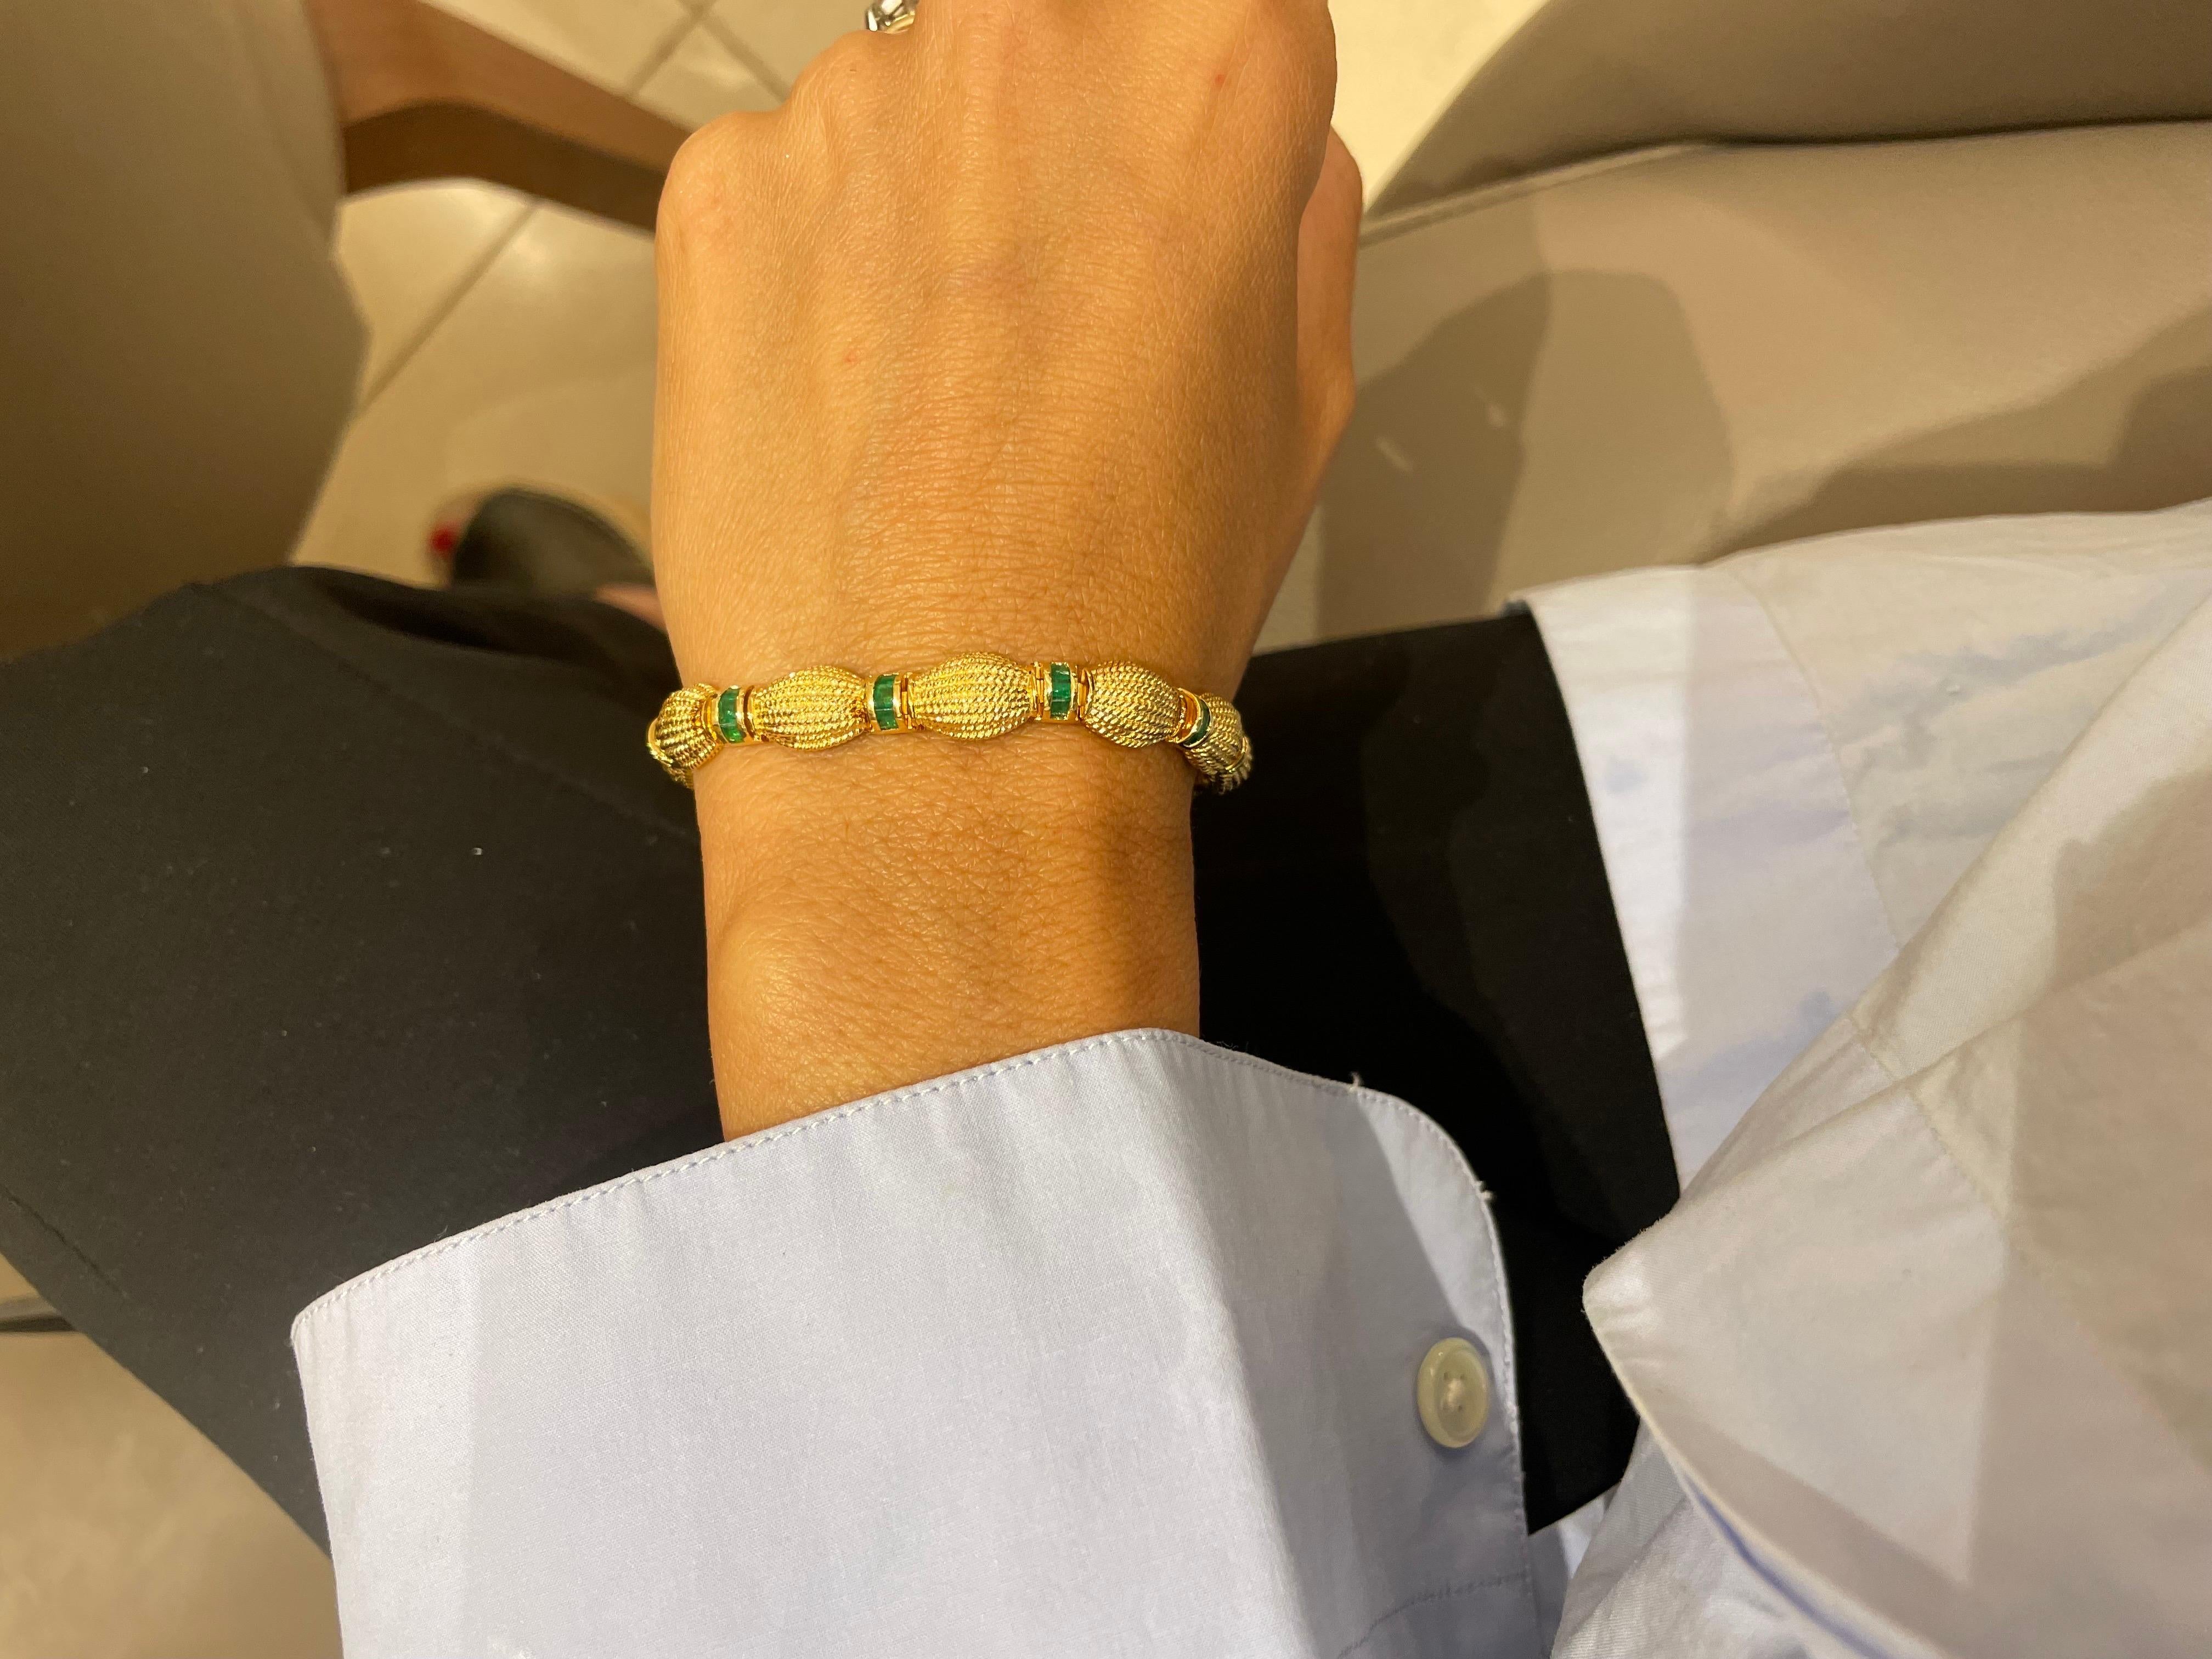 This 18 karat yellow gold bracelet is composed of 12 oval shaped beaded yellow gold links. There are 12 rondelles set with 2.88 carats of square emeralds that alternate with the oval links.
The bracelet measures 7